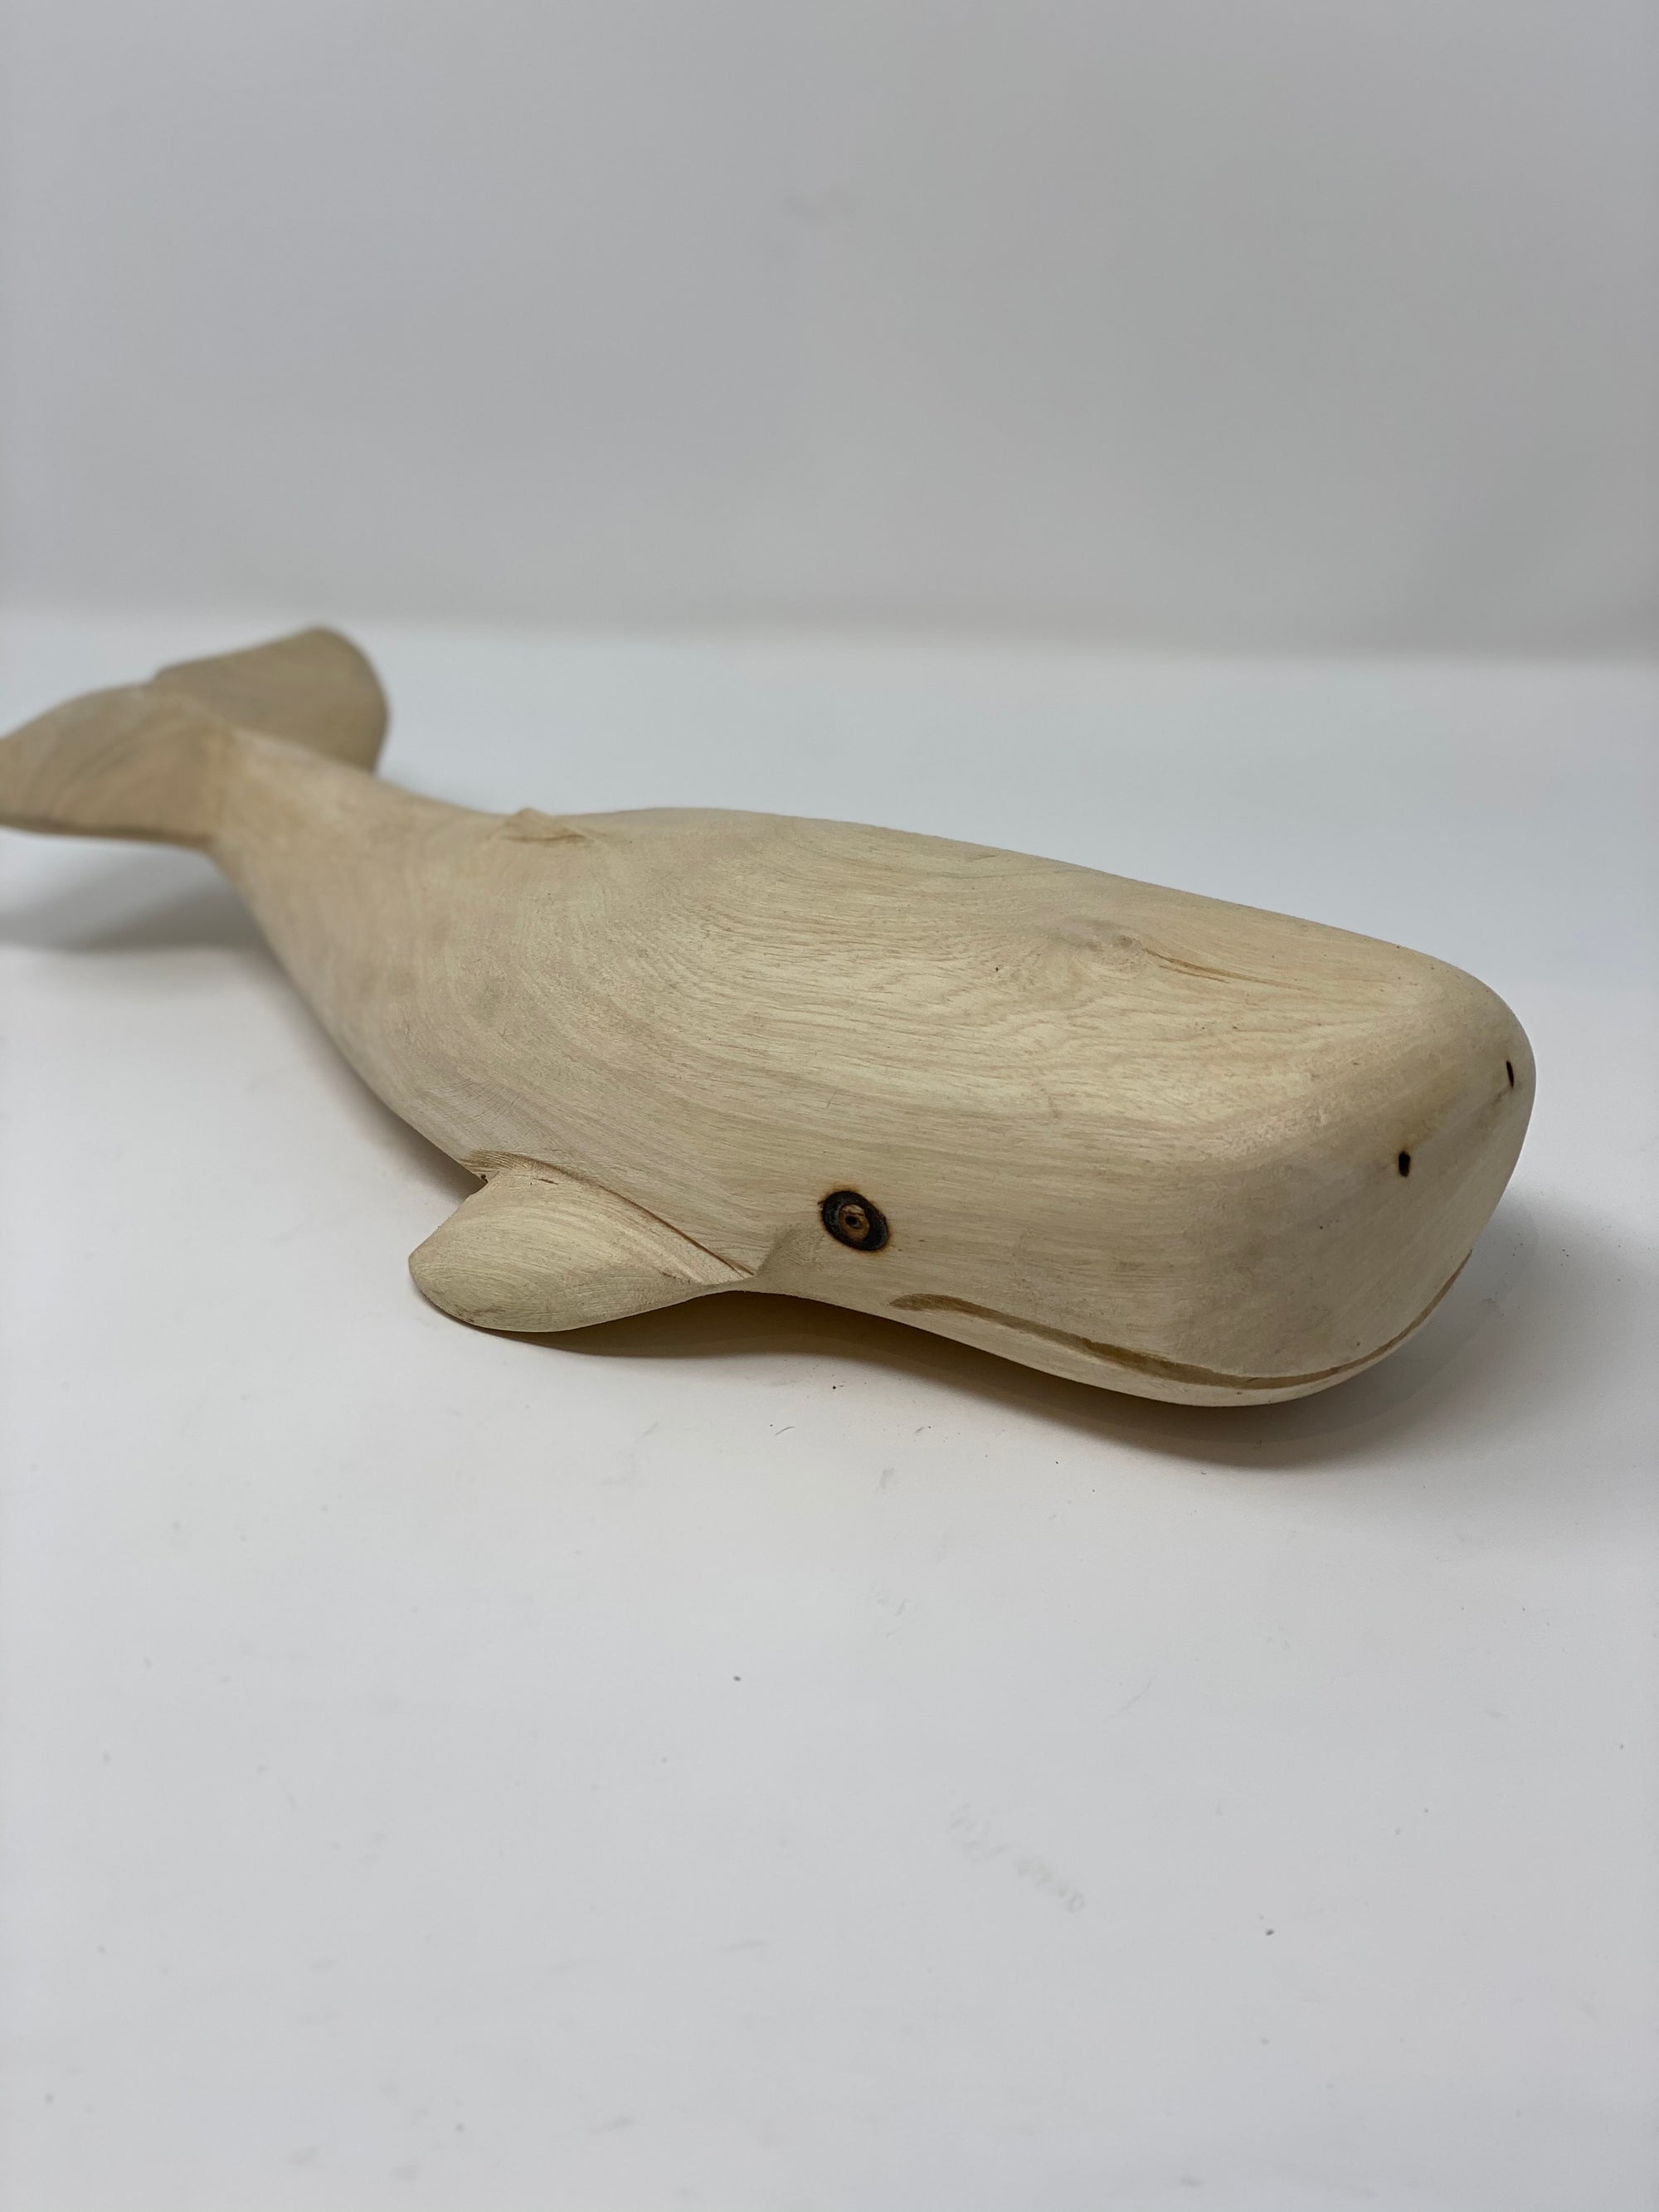 Whale - Hand Carved - S